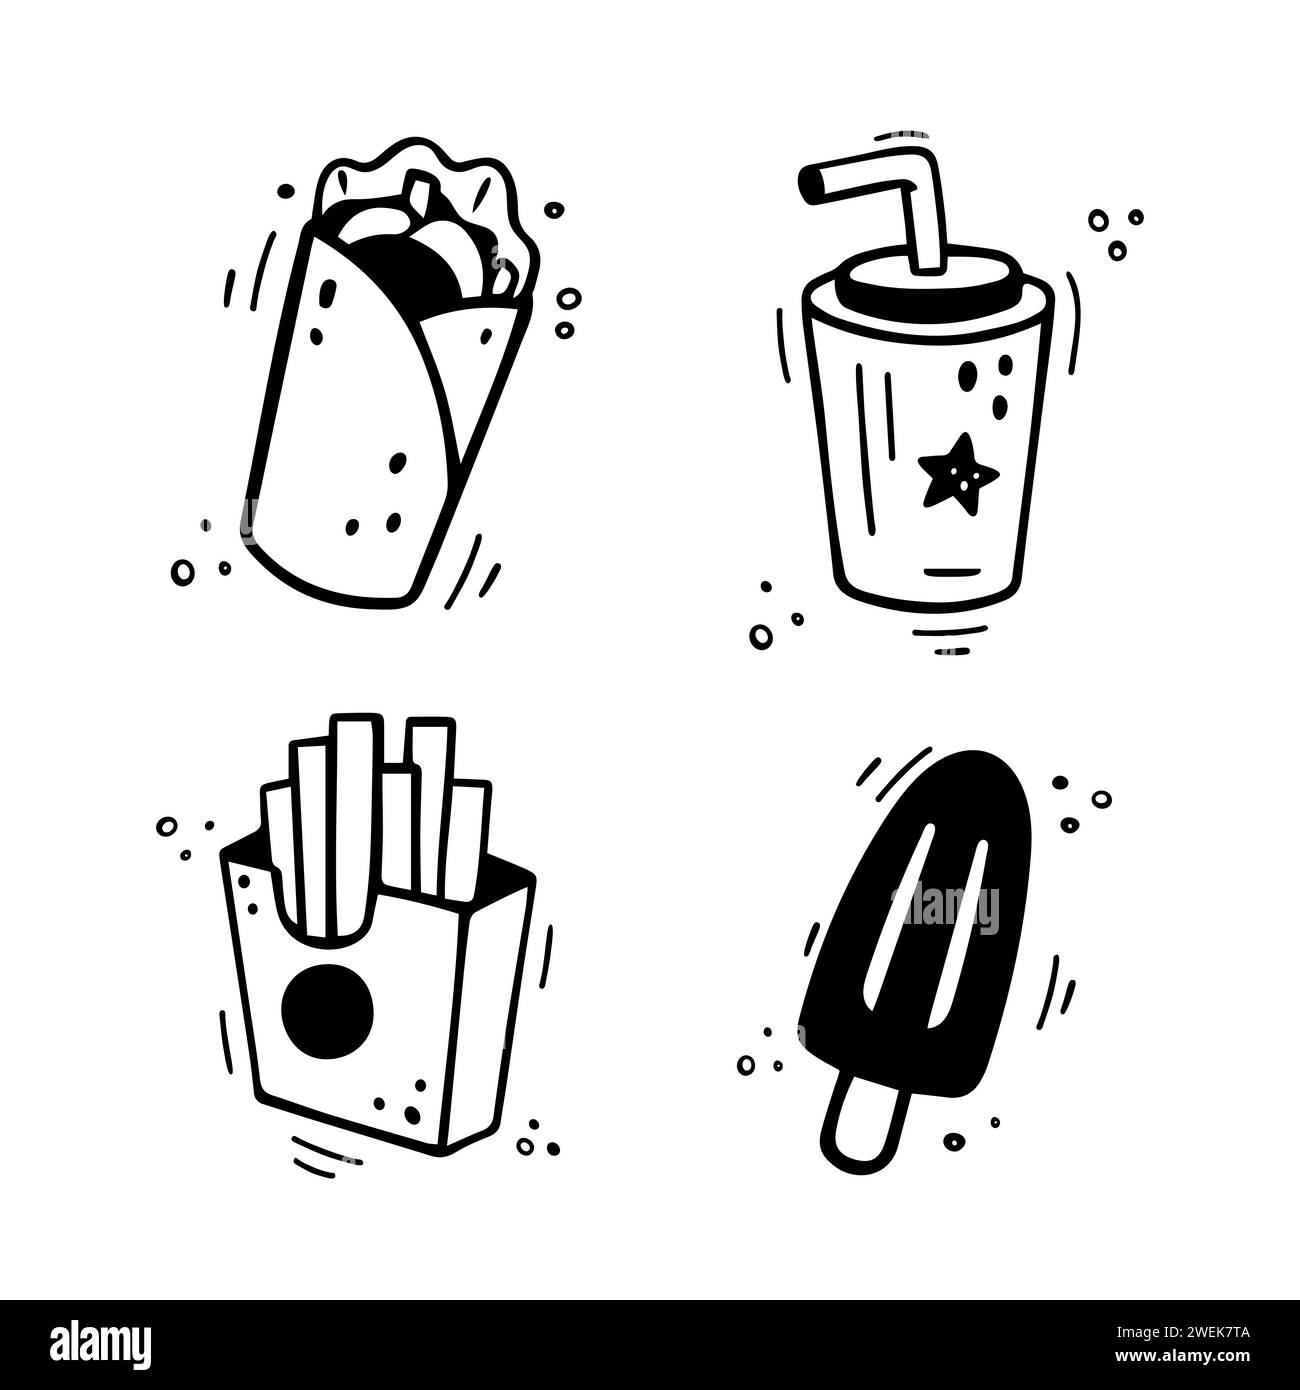 Fast food icons set - Shawarma, Burrito, French fries, Paper cup with drink, Ice cream. Hand drawn fast food combo. Comic doodle style. Colorful snacks drawn with felt tip pen. Vector illustration Stock Vector